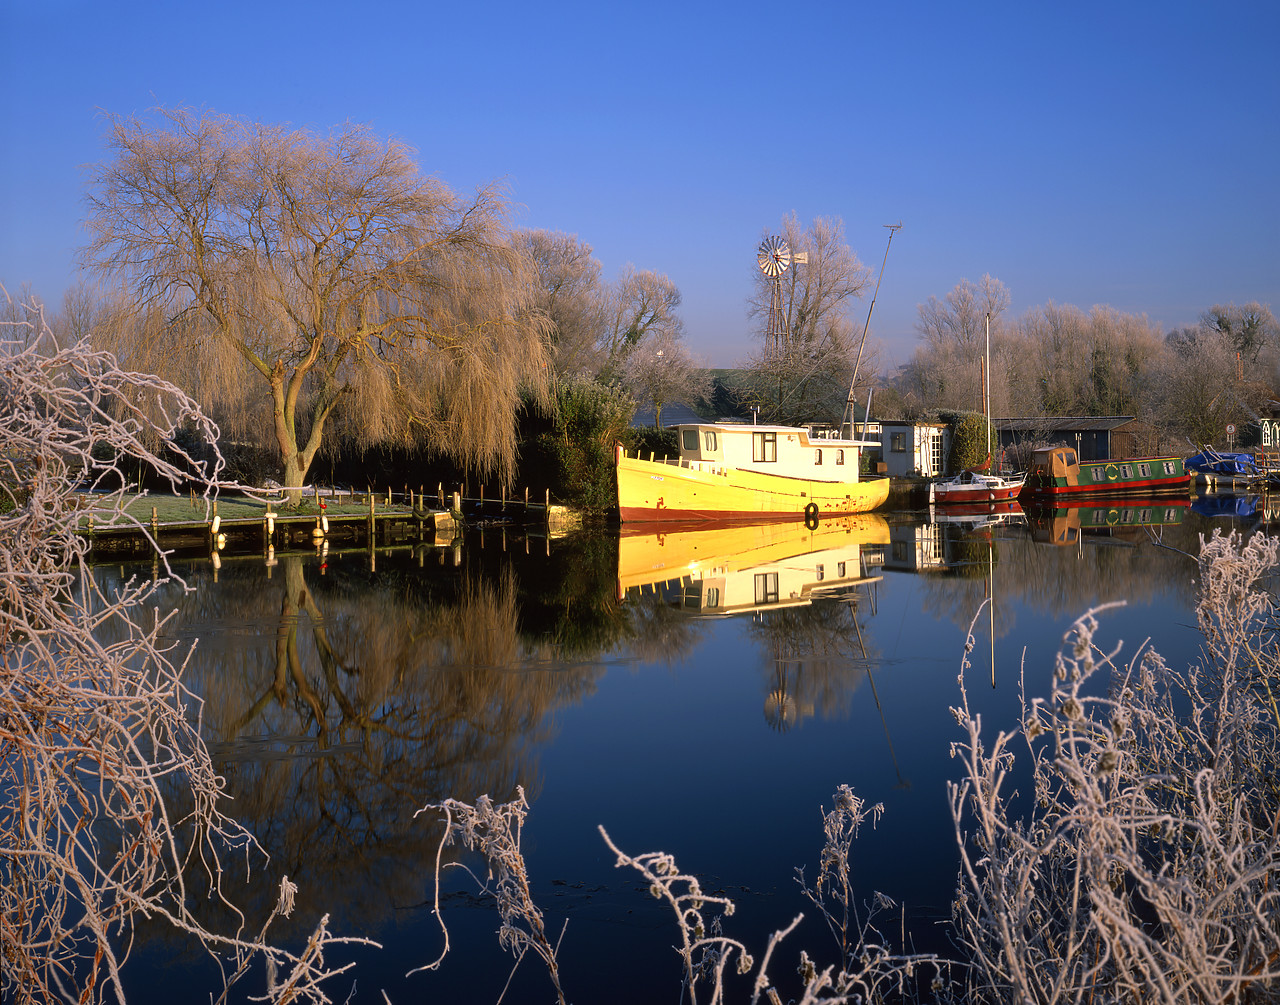 #020031-1 - Winter Reflections along River Yare, Norwich, Norfolk, England